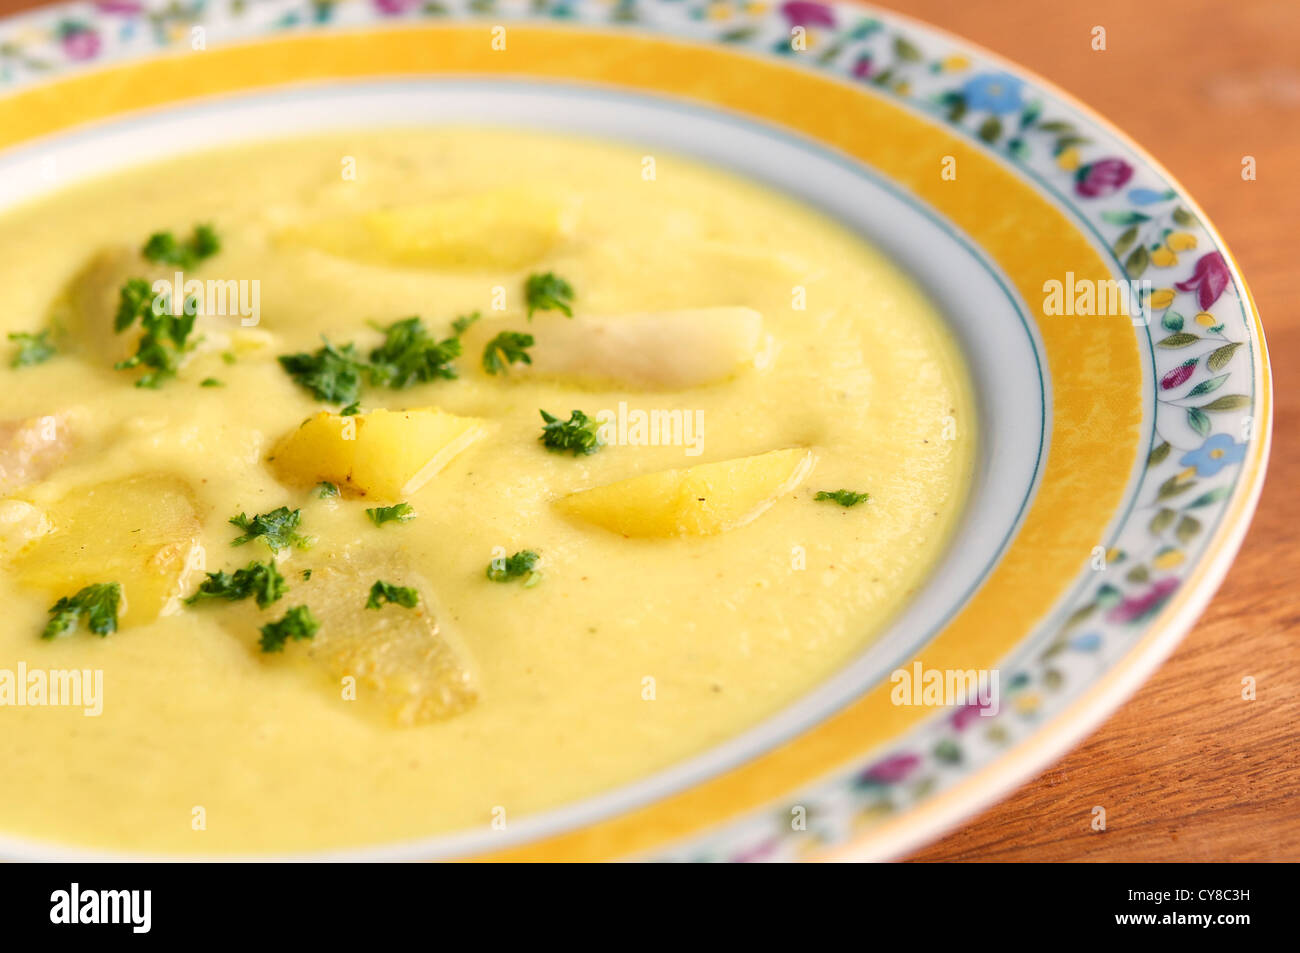 A lovely sweet and earthy pear and parsnip soup with a touch of curry. Stock Photo